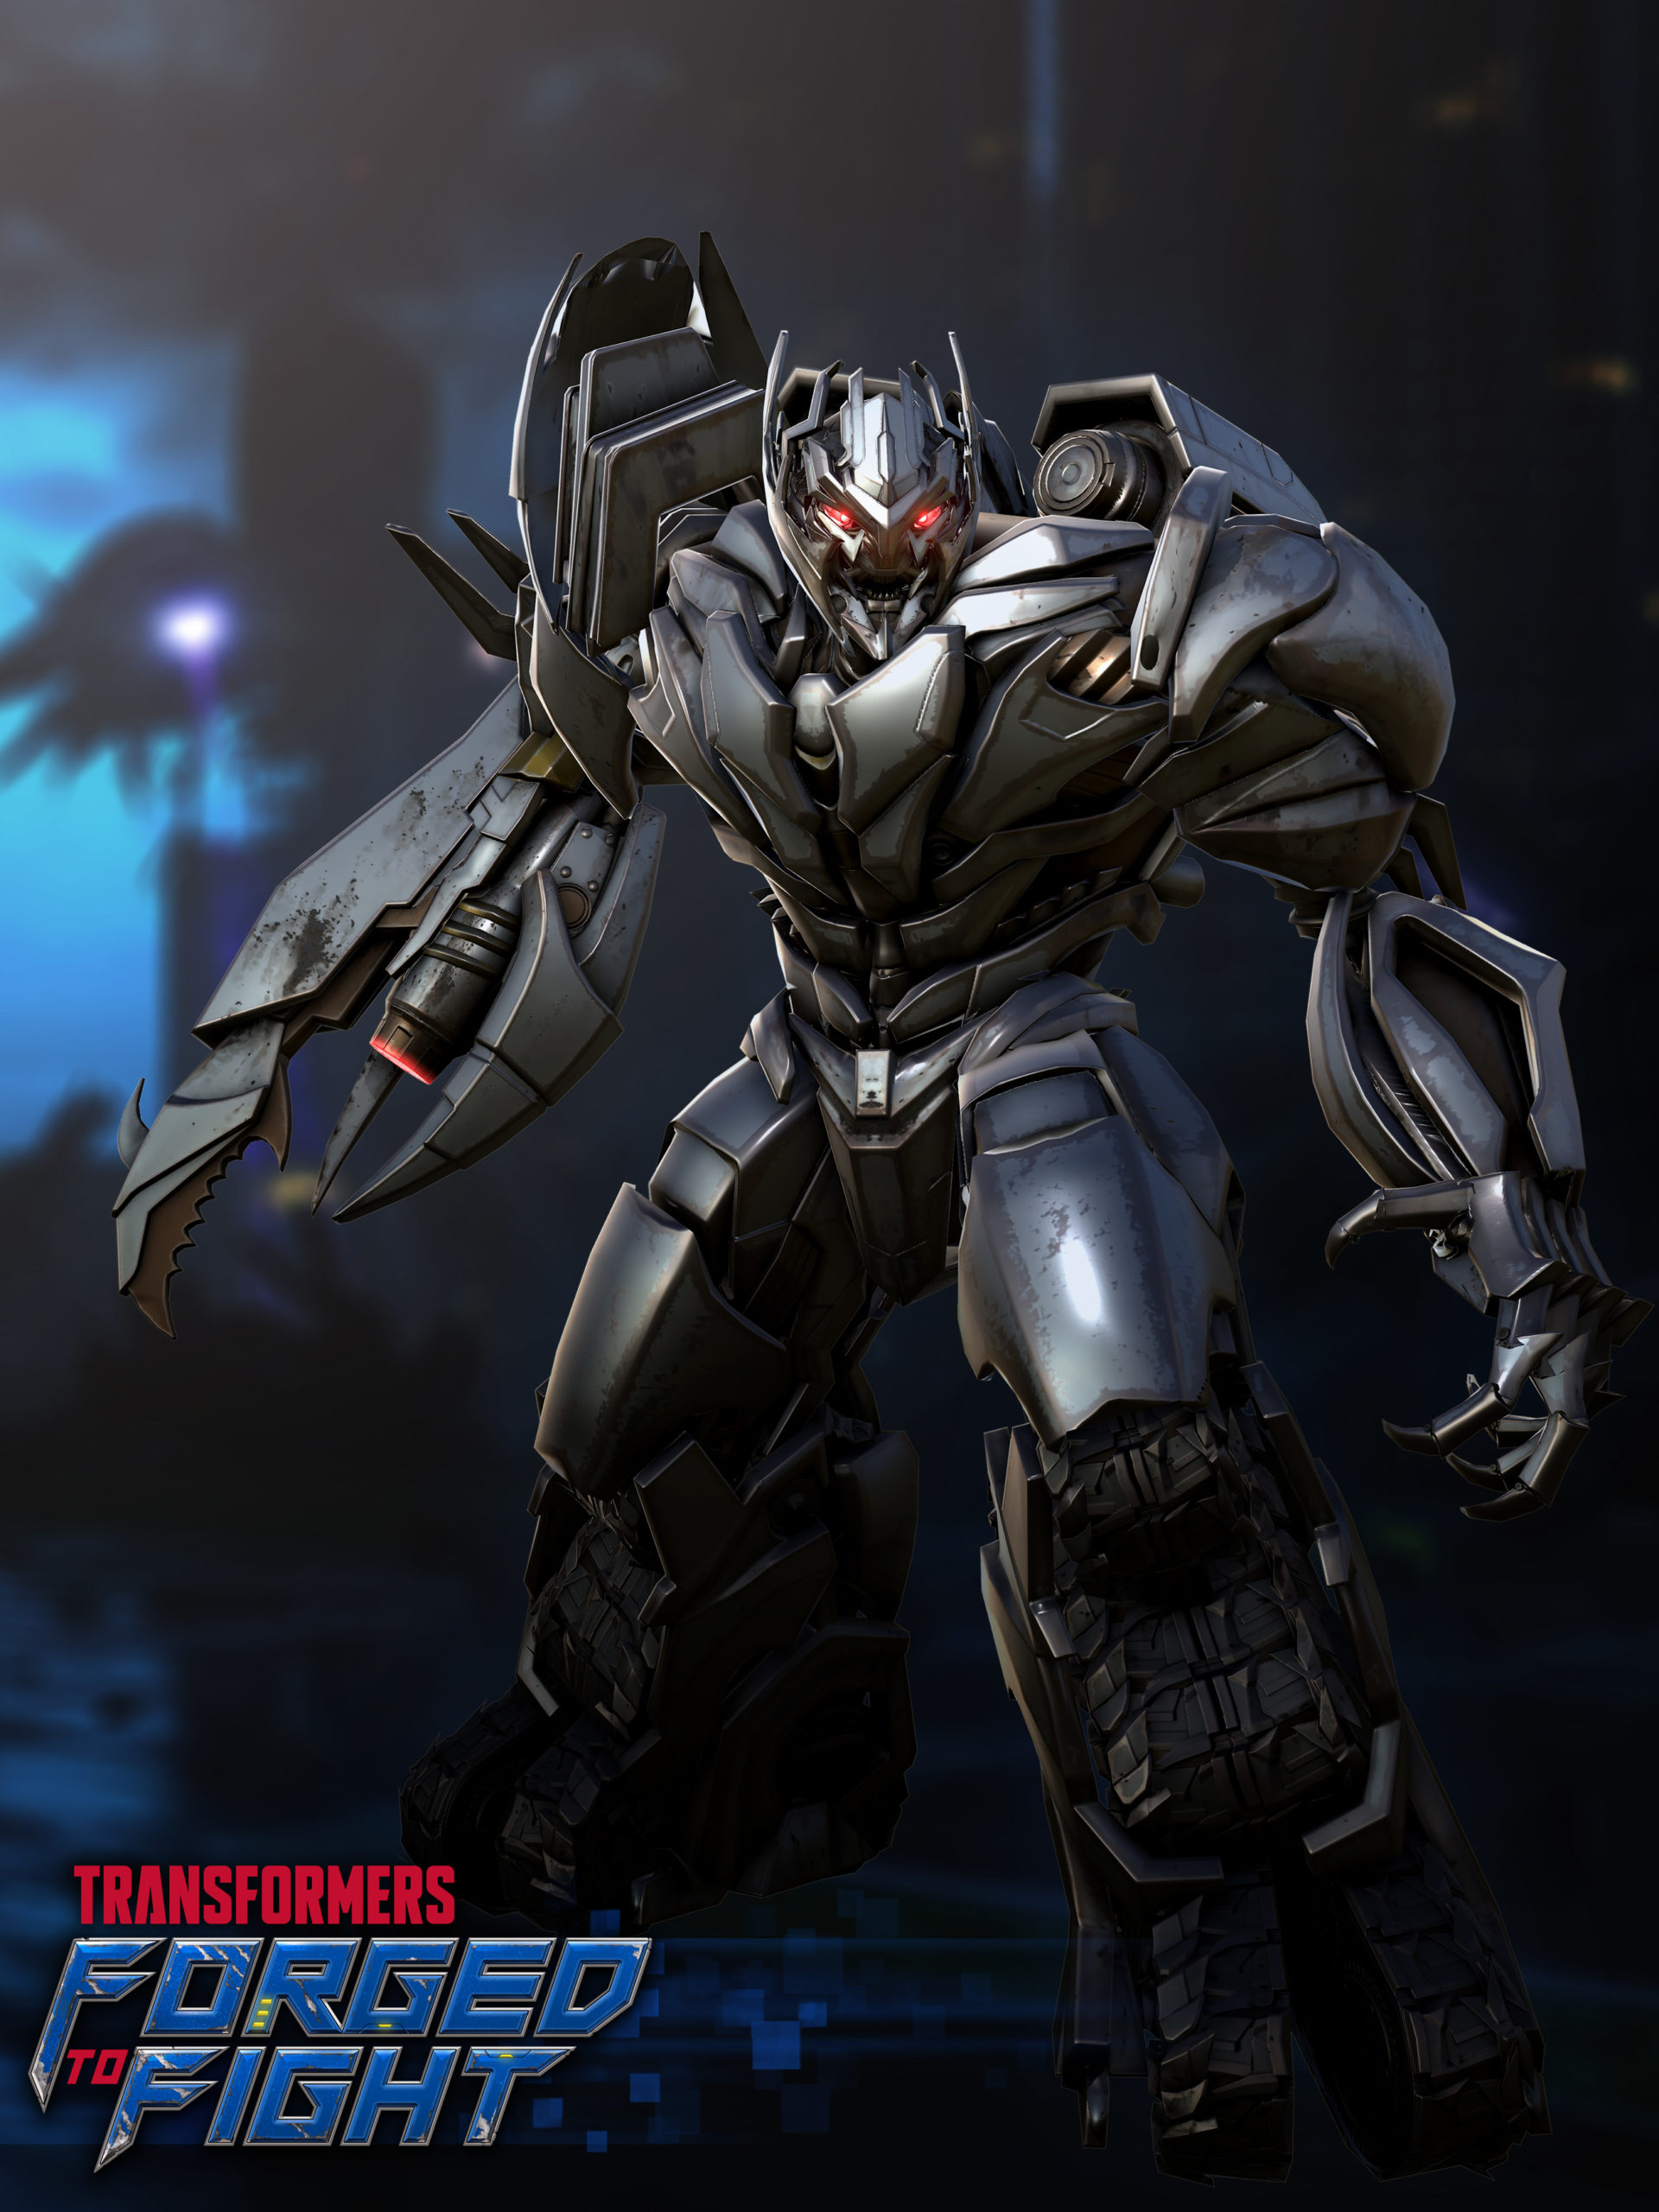 Transformers: Forged To Fight Takes Kabam’s Fighting Game To The Next Level